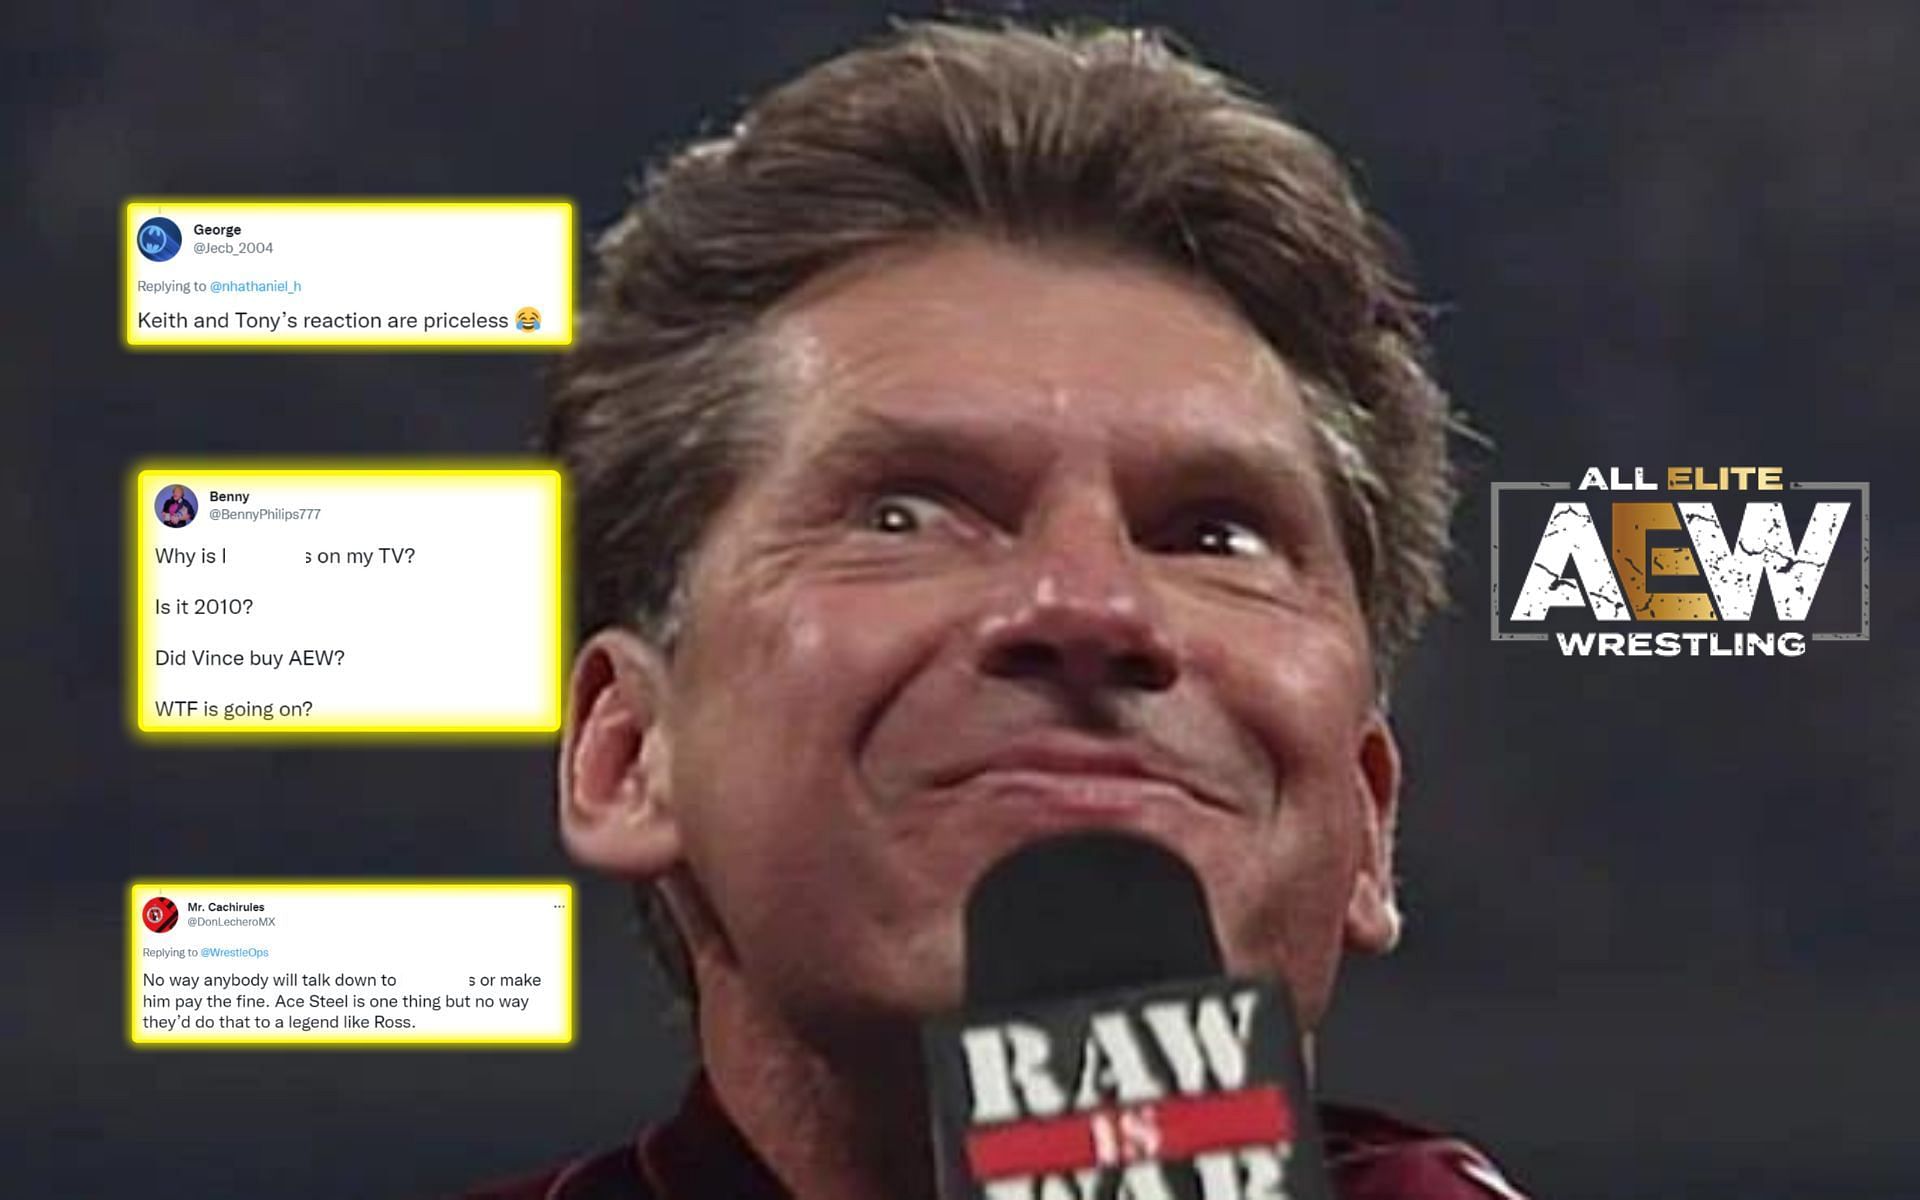 Vince McMahon allegedly cited his interest in returning to WWE in an administrative role